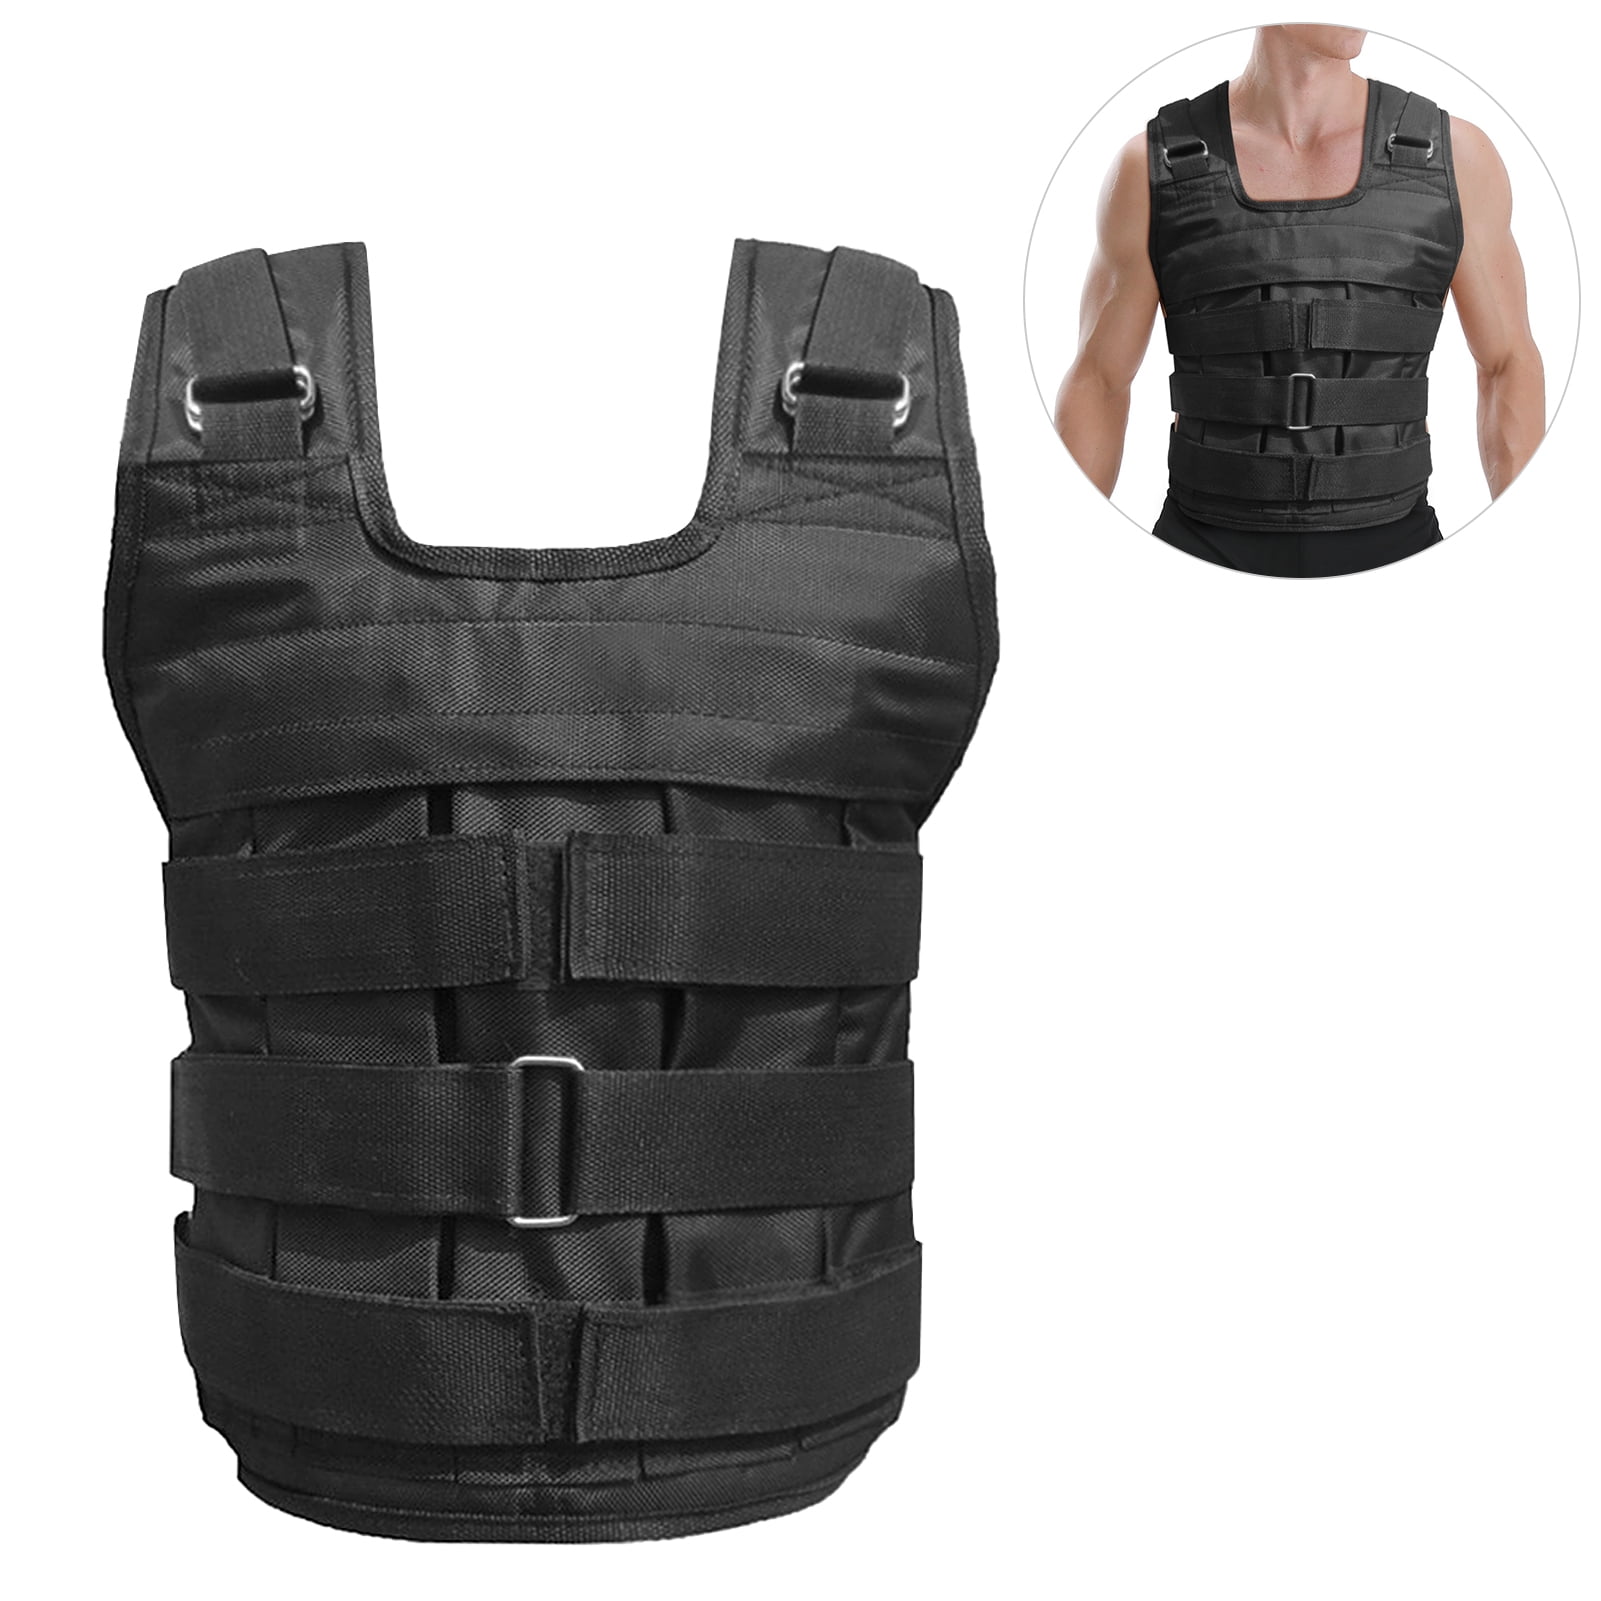 Durable Loading Weighted Vest Adjustable Weight Training Exercise Waistcoat 